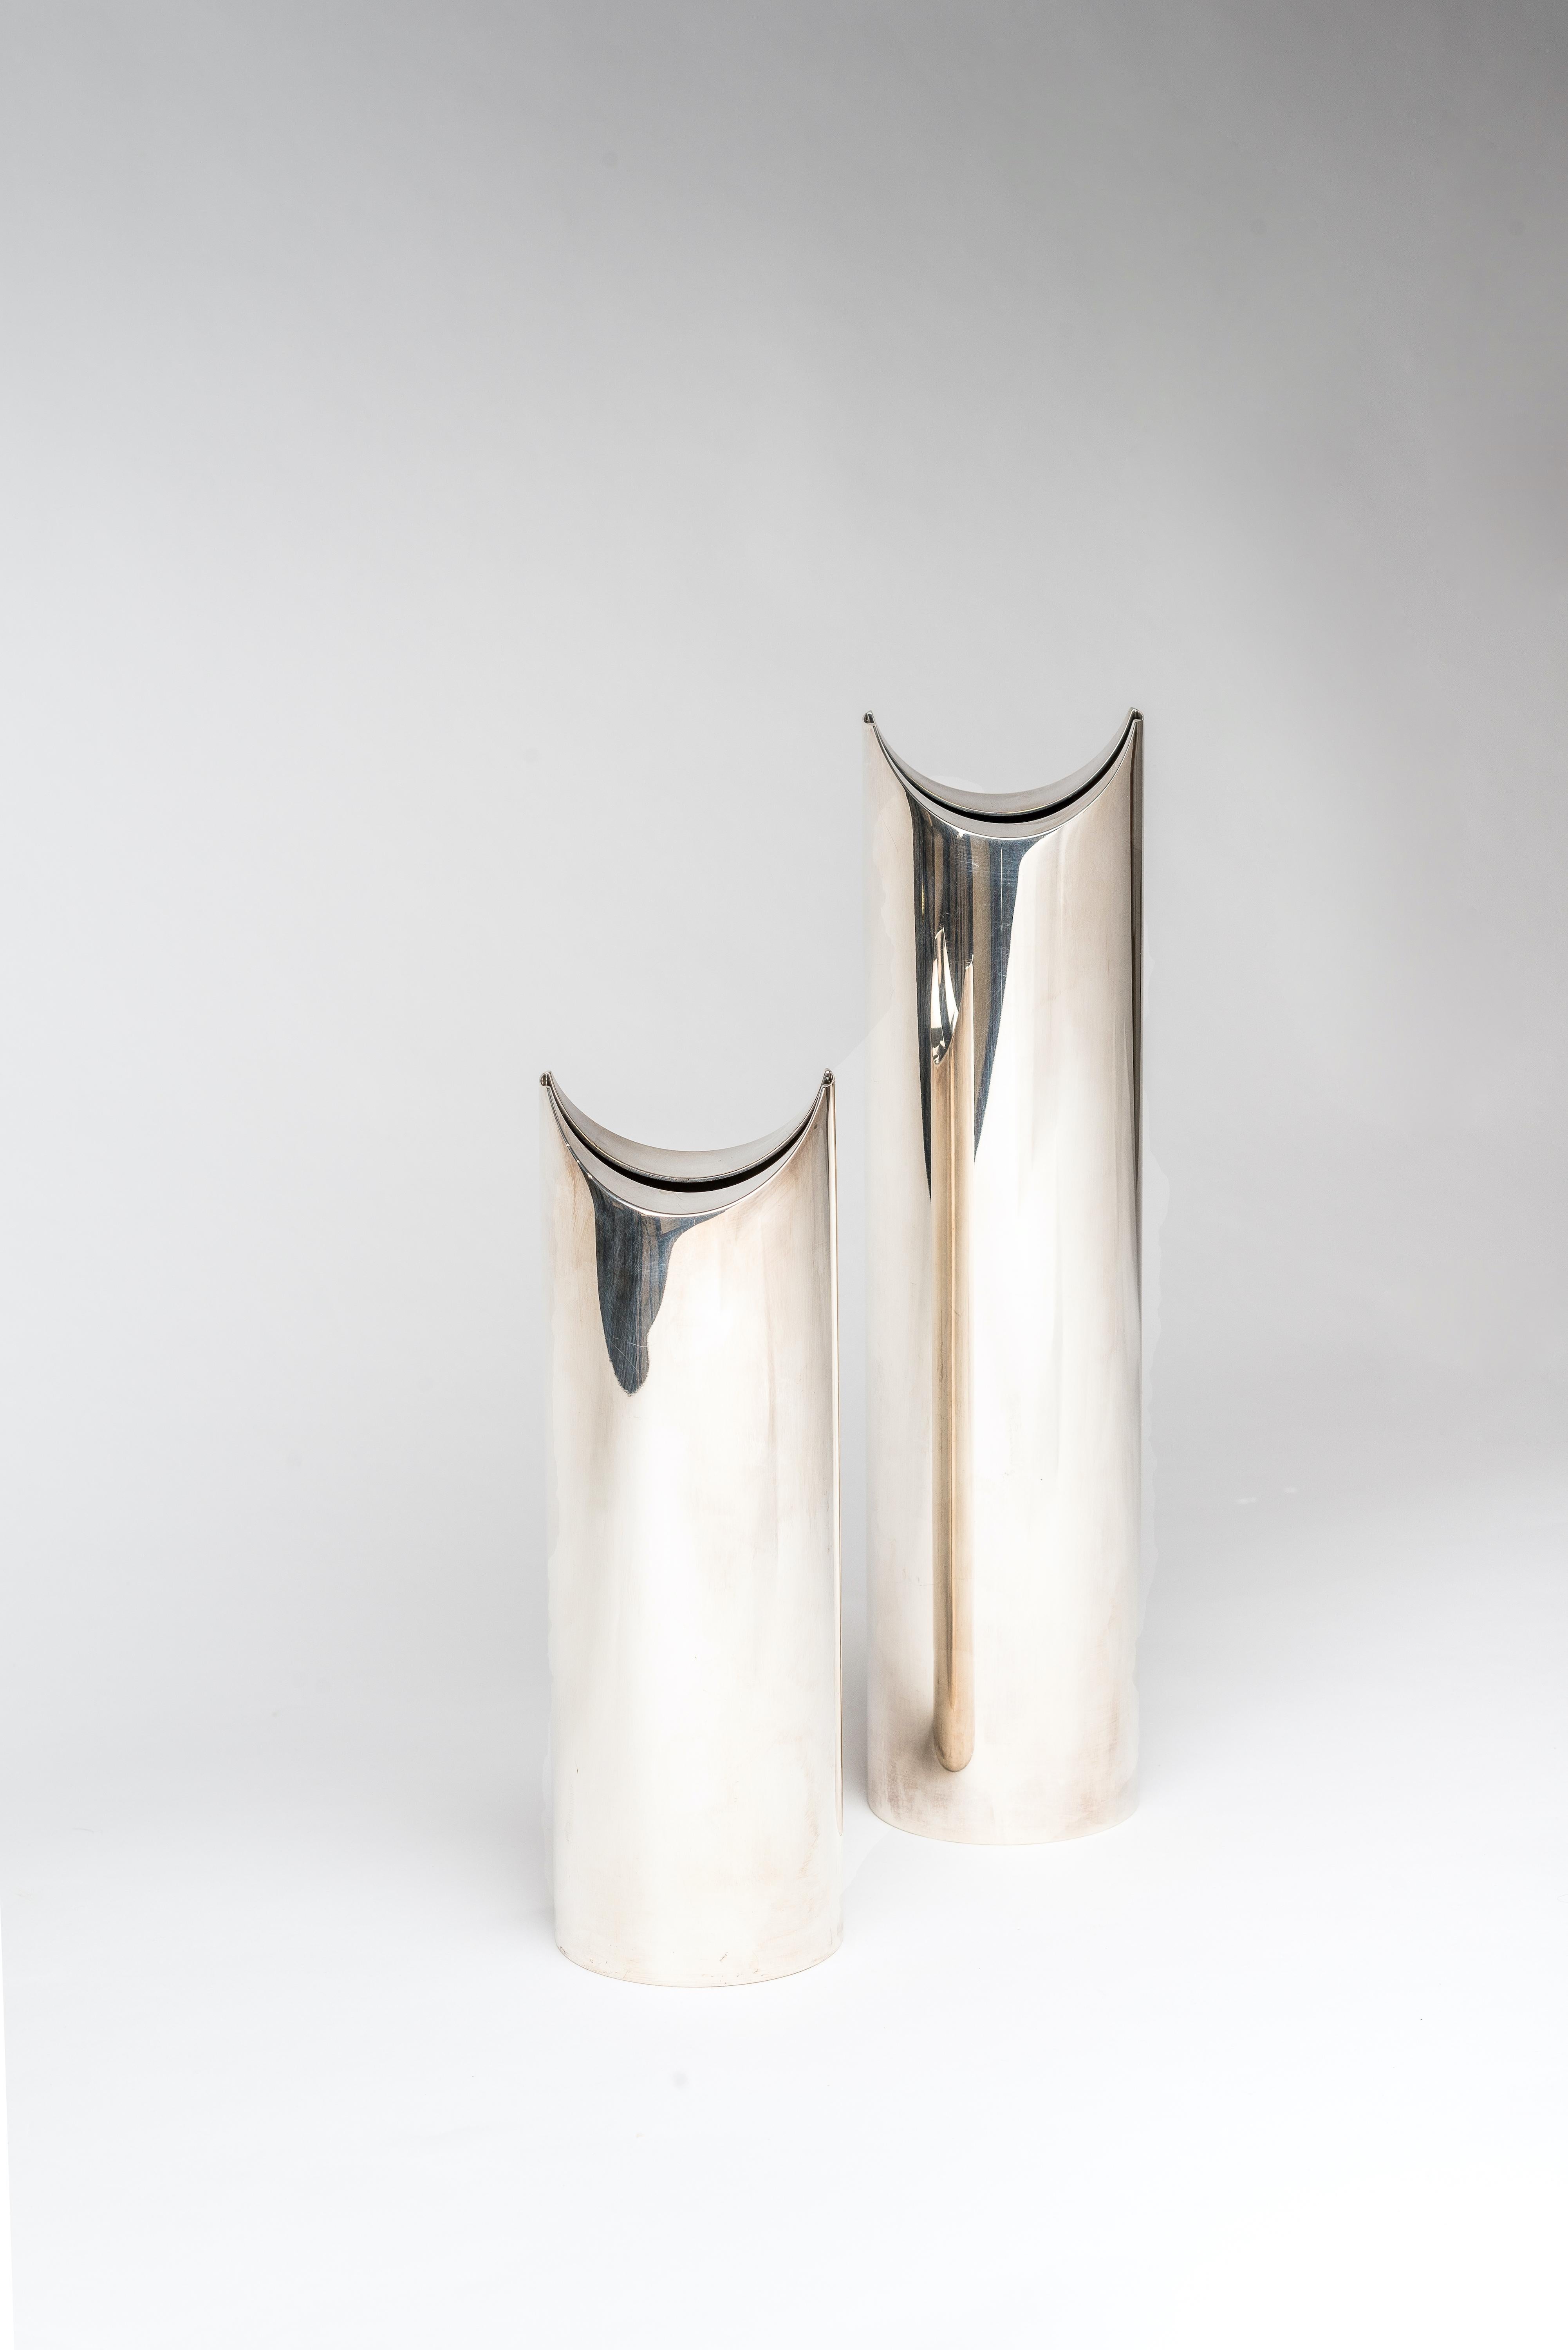 Pair of Ohun Ohara Vases in silver plated metal, modernist style.
Stamped to undersides SABBATINI.
Maker's mark MADE IN ITALY.